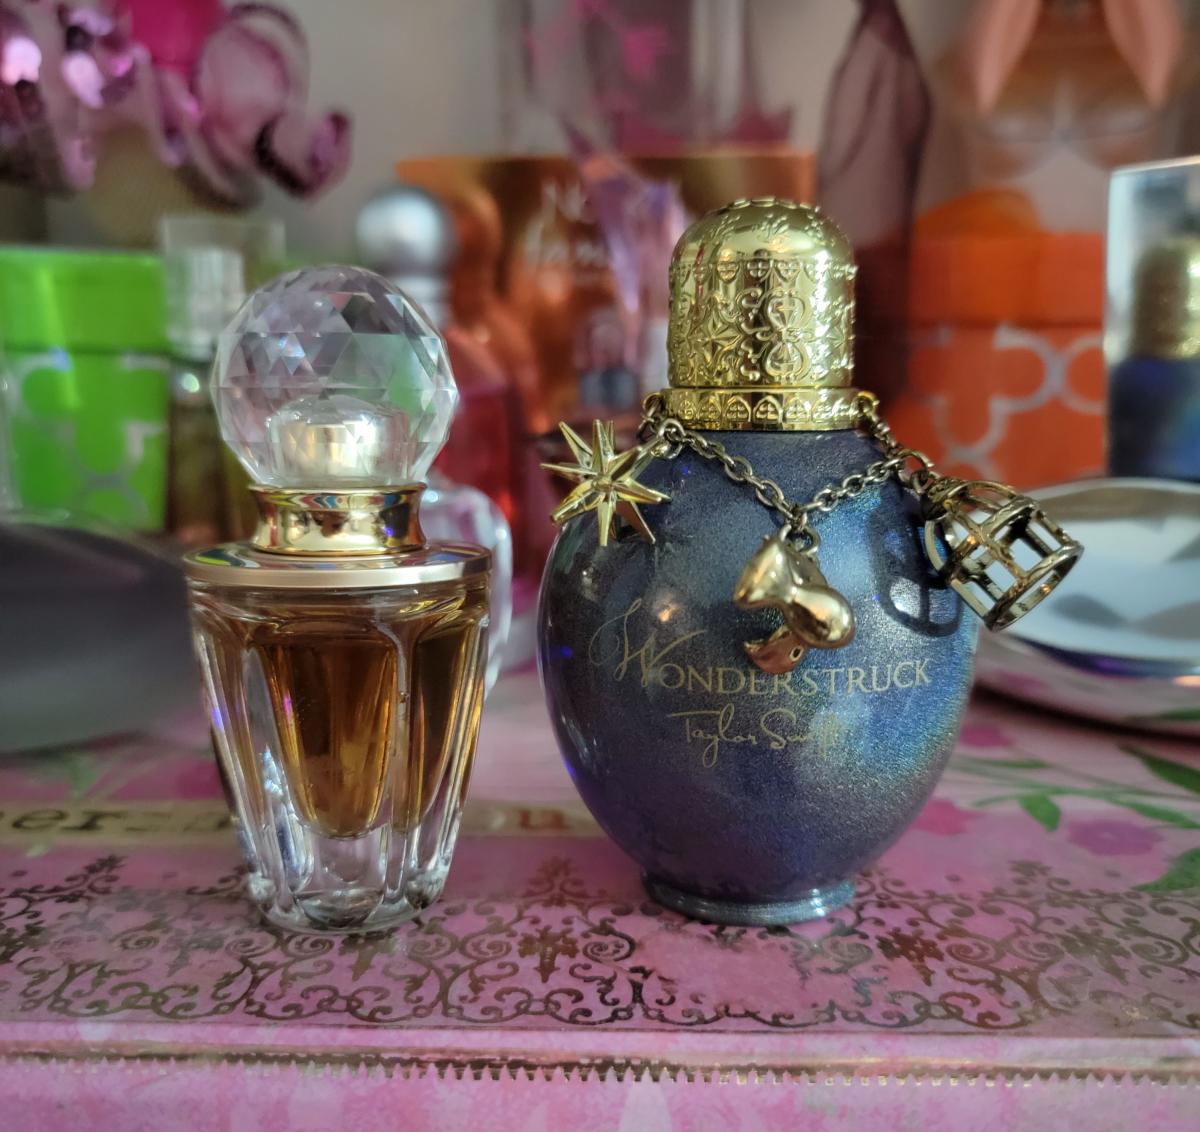 Taylor Taylor Swift perfume - a fragrance for women 2013